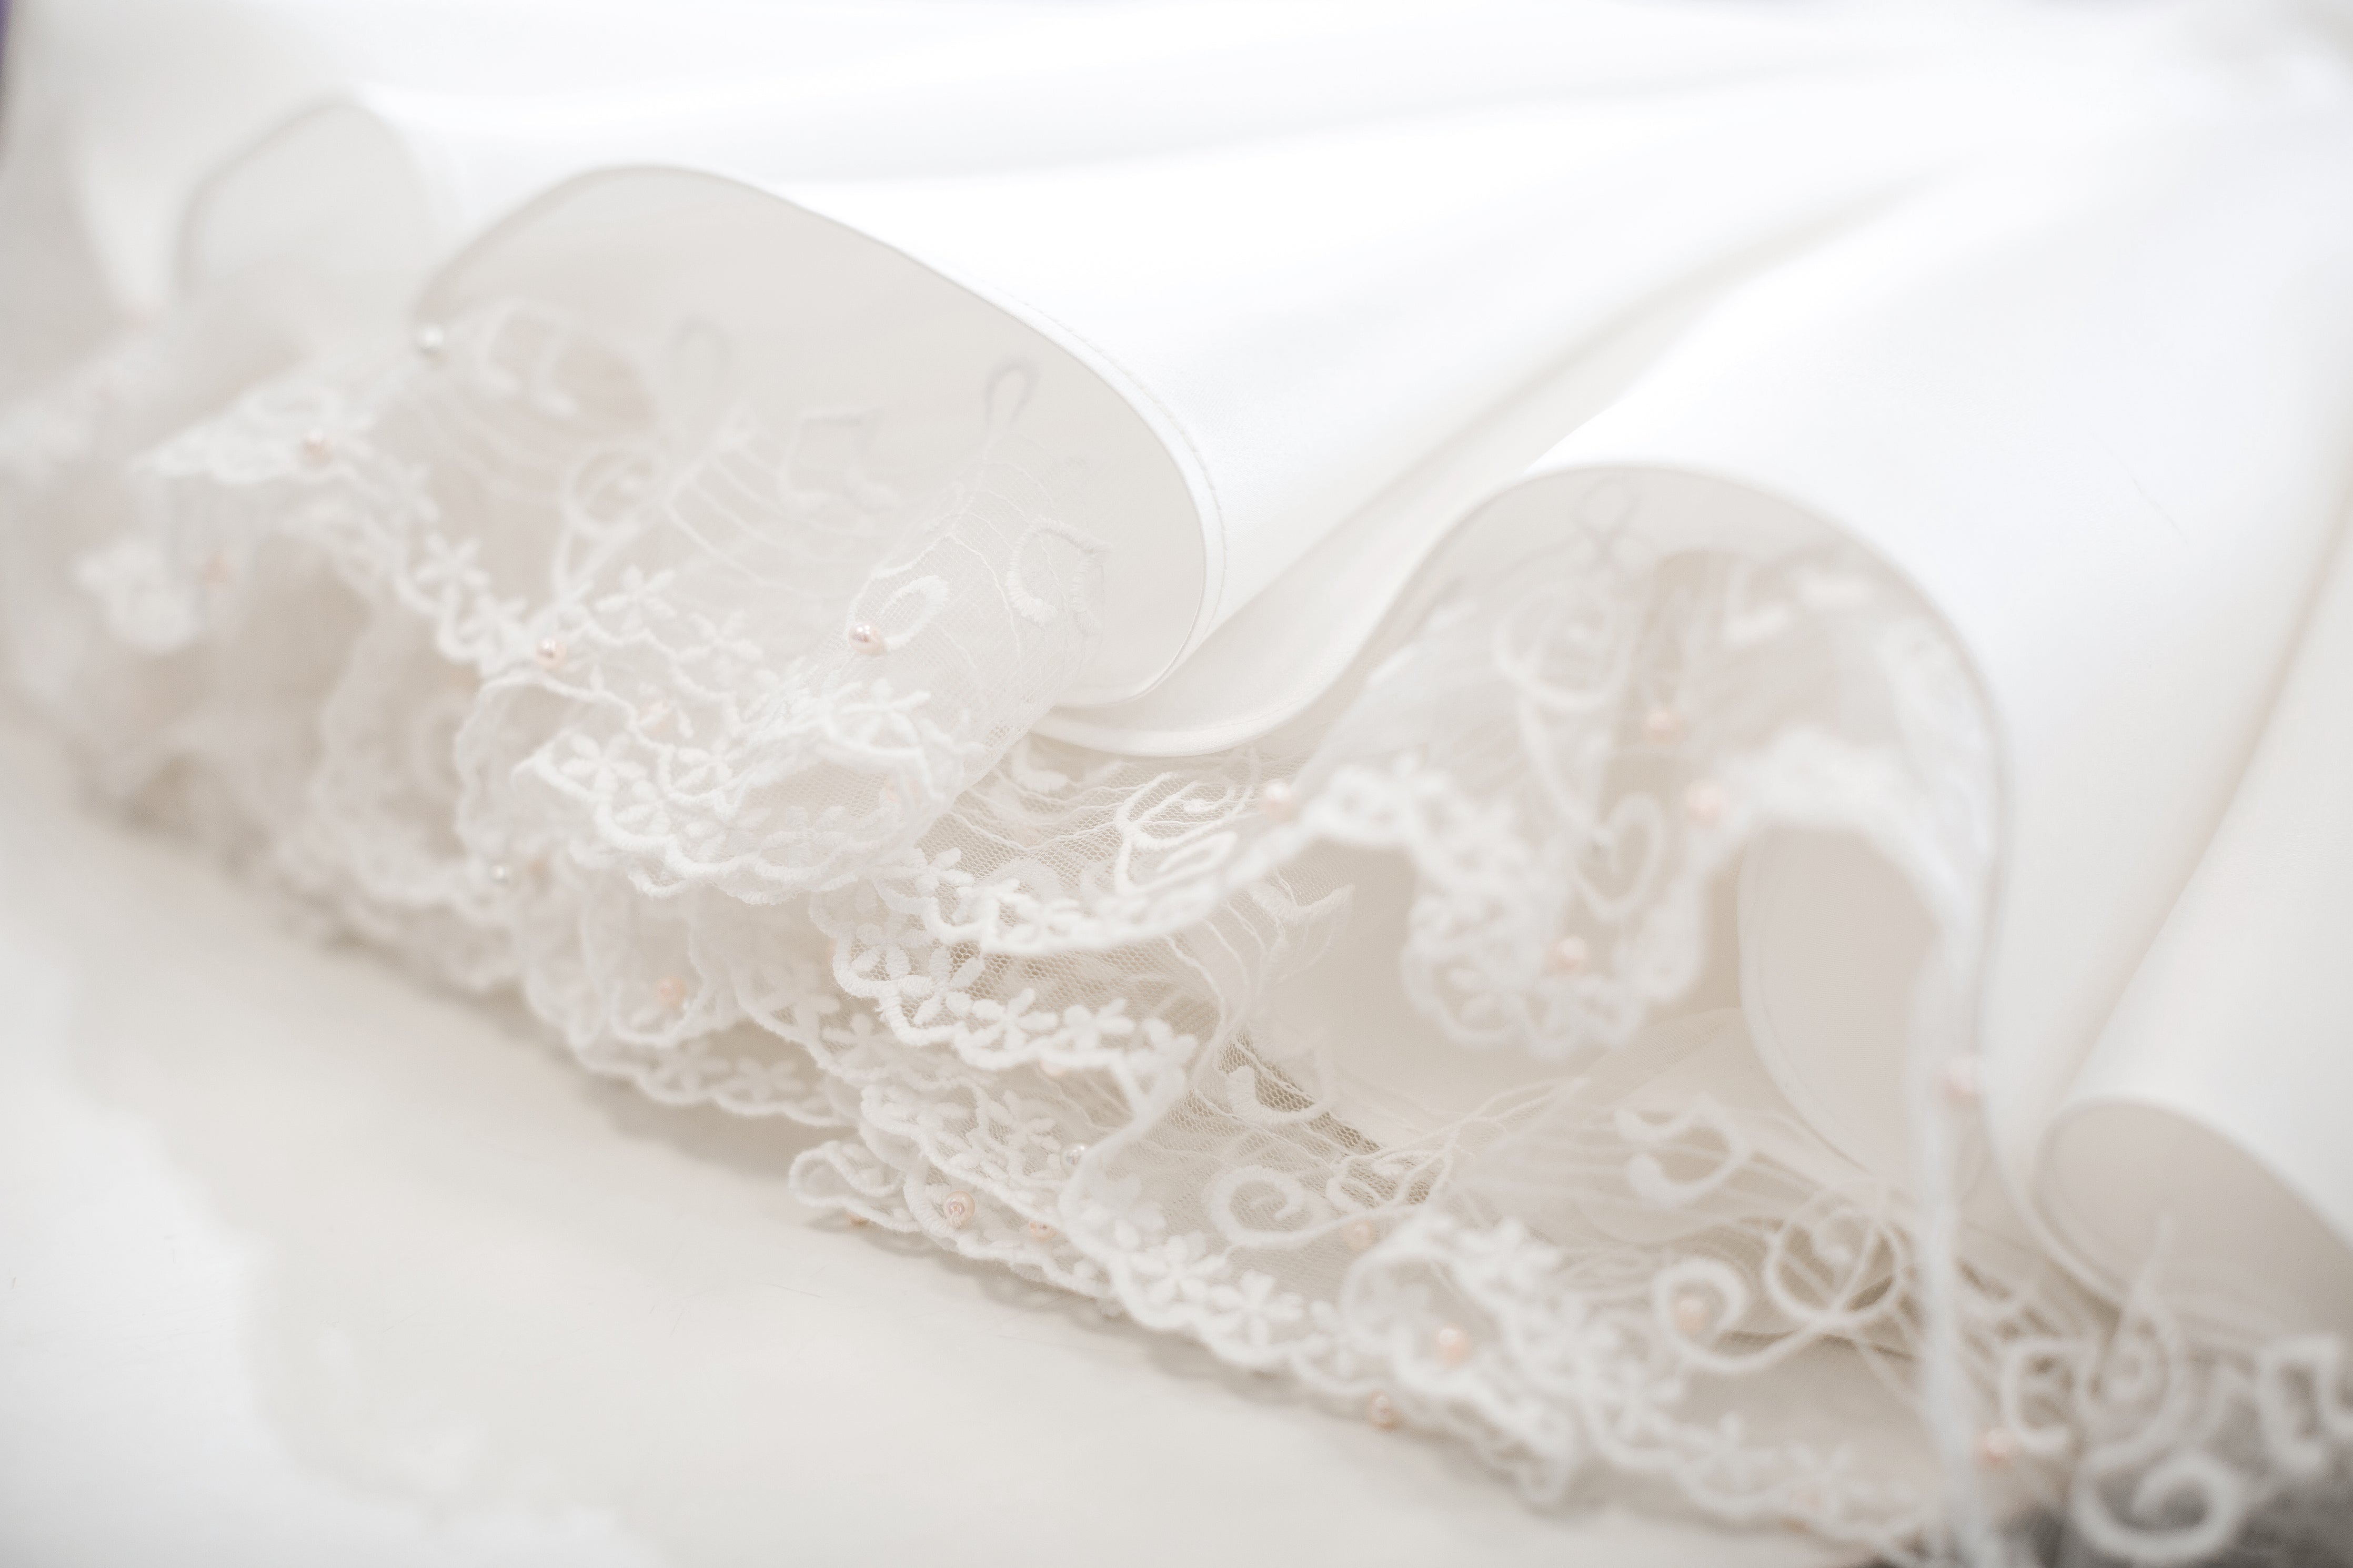 The Ultimate Guide to Wedding Dress Fabrics